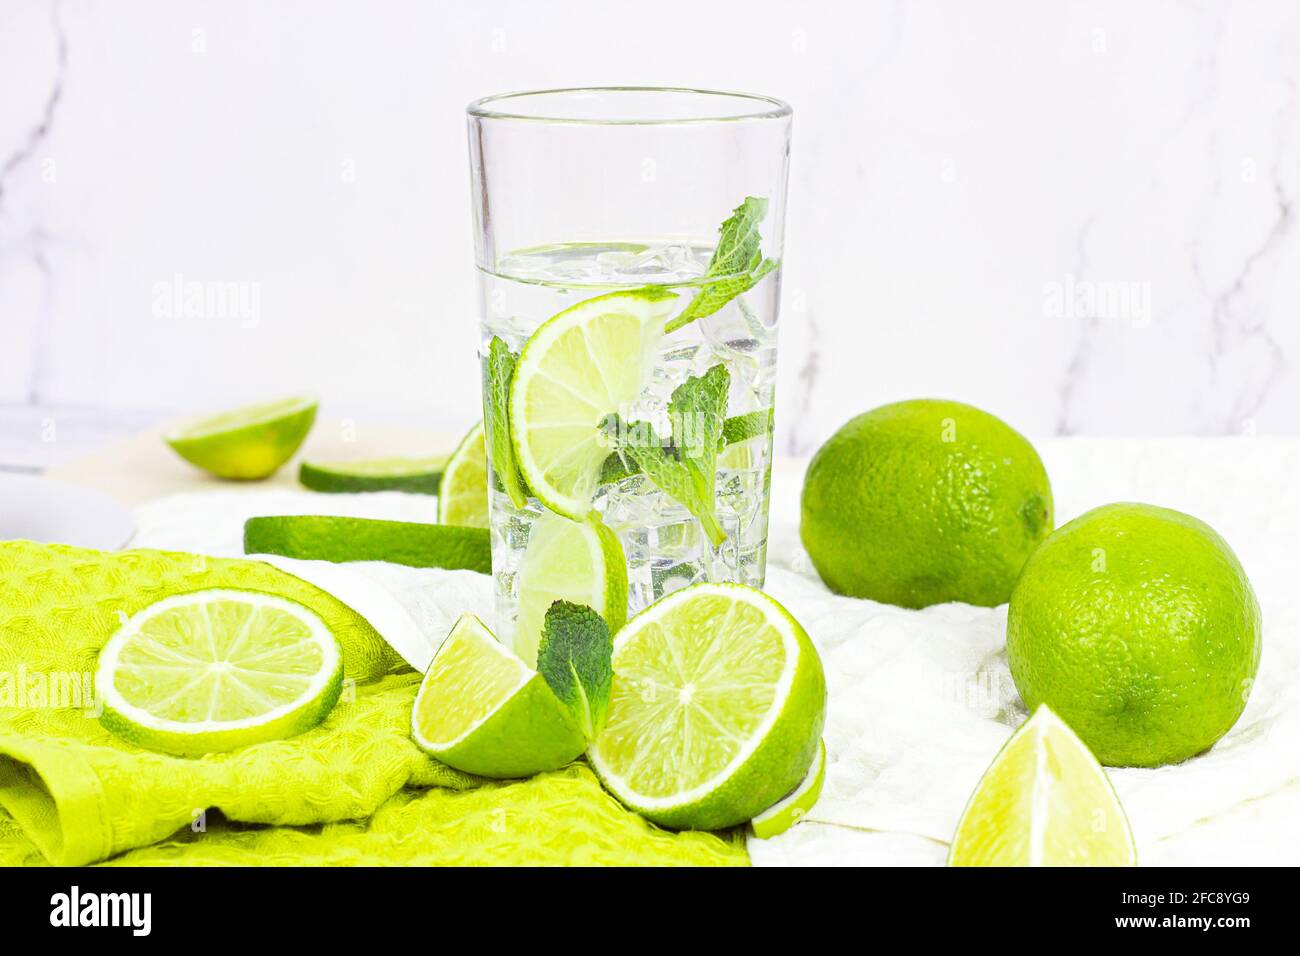 Fresh homemade mojito cocktail drink made from limes and mint leaves in a glass with ice cubes on light background in the kitchen. Stock Photo